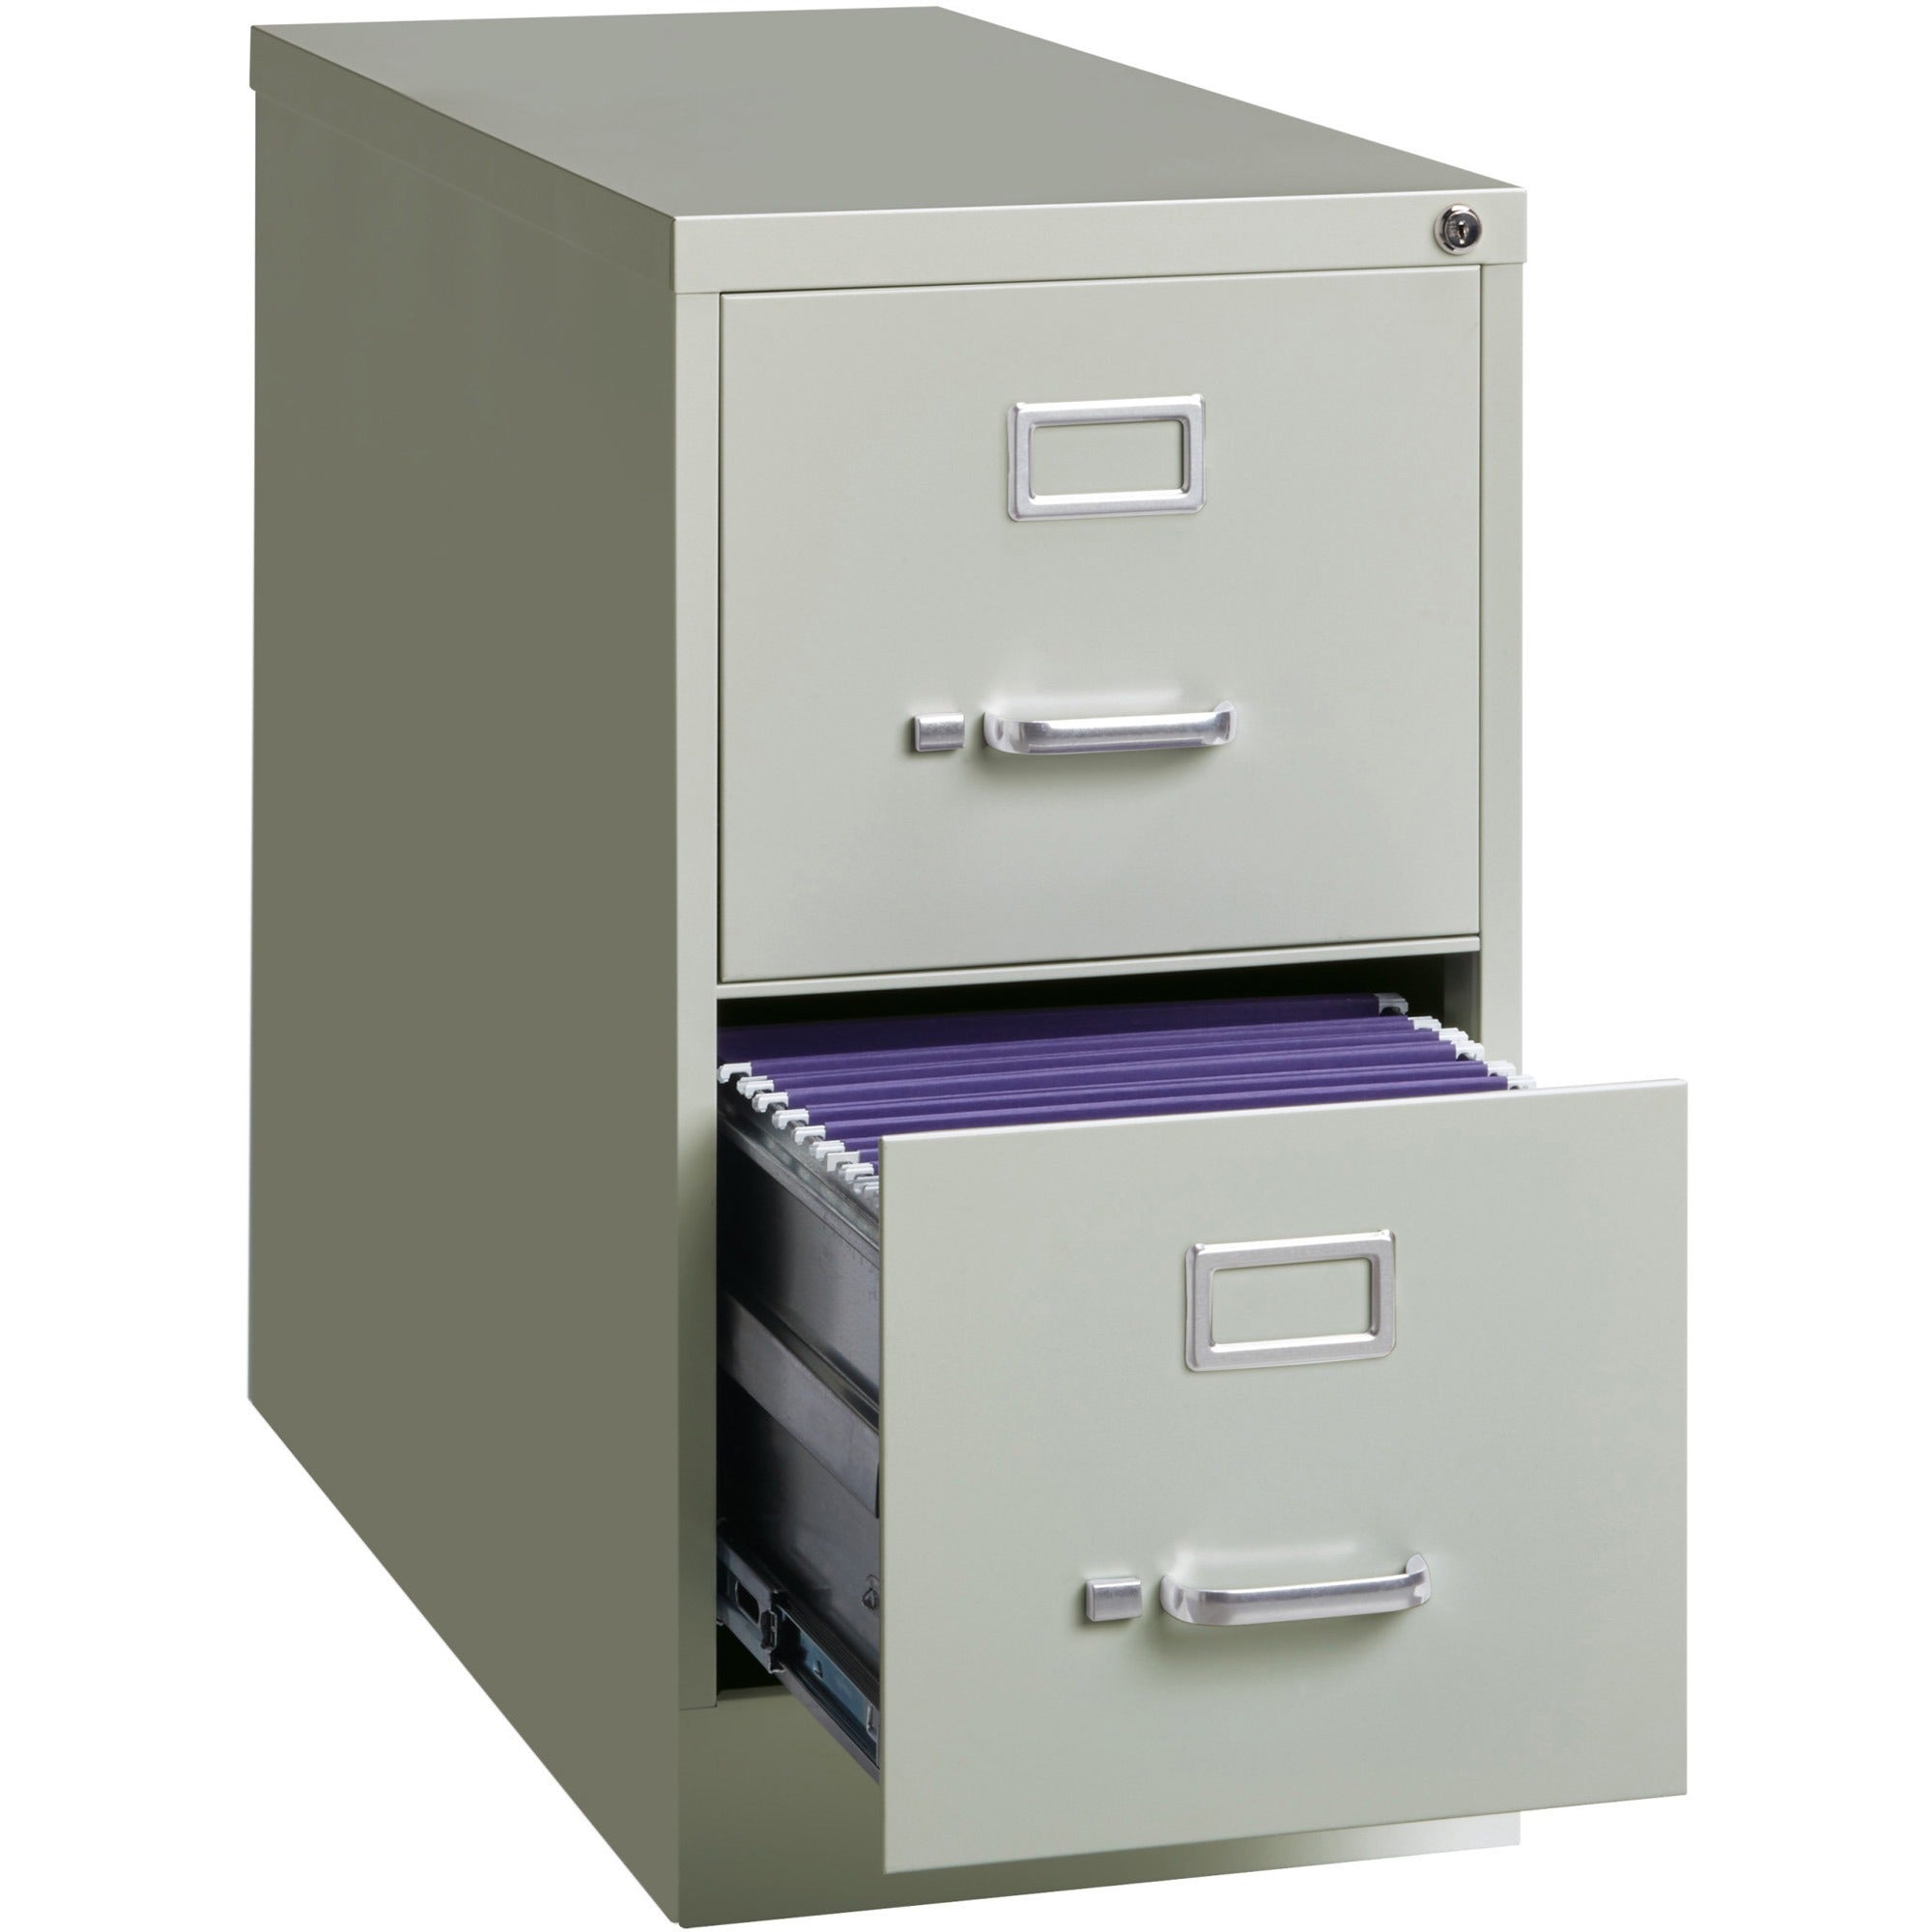 Lorell Fortress Series 26-1/2" Commercial-Grade Vertical File Cabinet - 15" x 26.5" x 28.4" - 2 x Drawer(s) for File - Letter - Vertical - Security Lock, Ball-bearing Suspension, Heavy Duty - Light Gray - Steel - Recycled - 